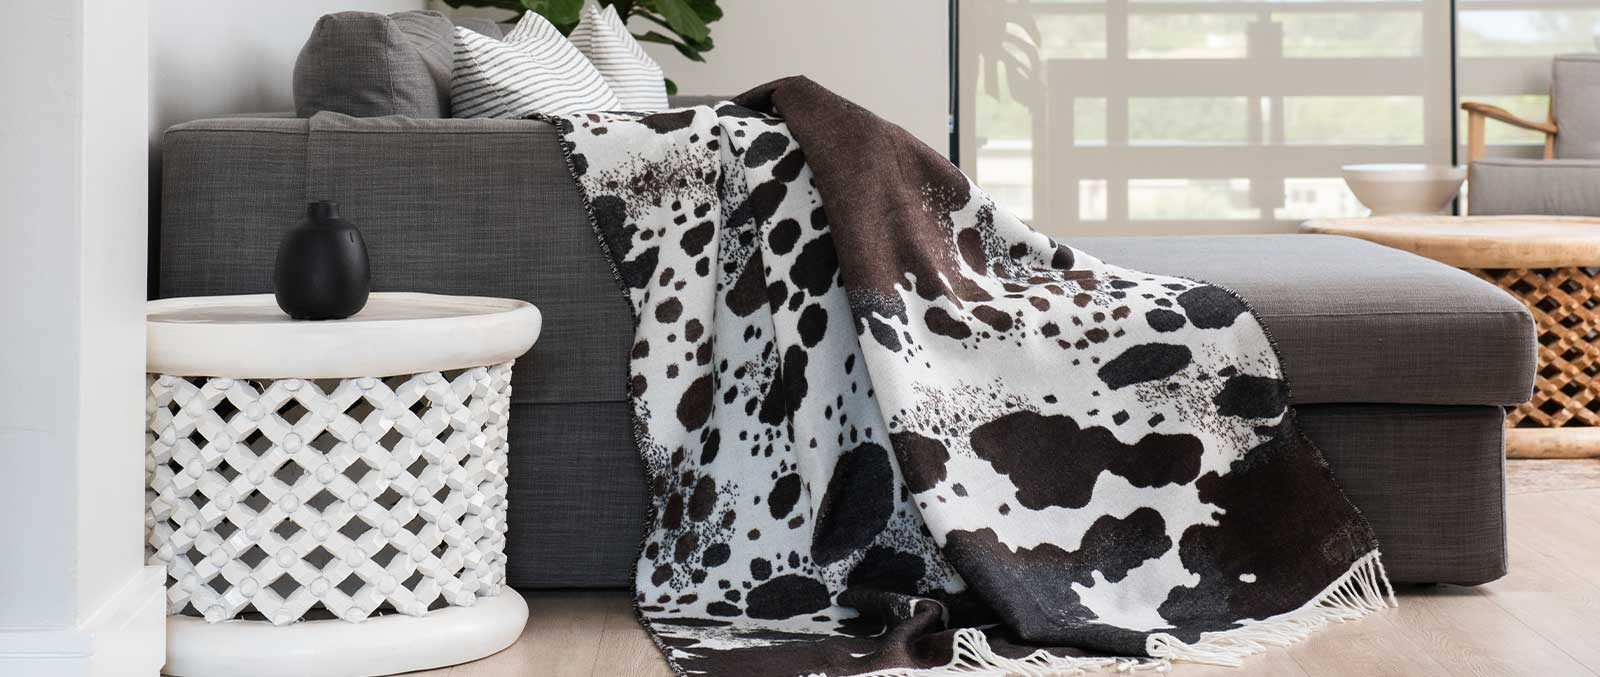 Ngnui cow print blanket lying on couch in contemporary home 